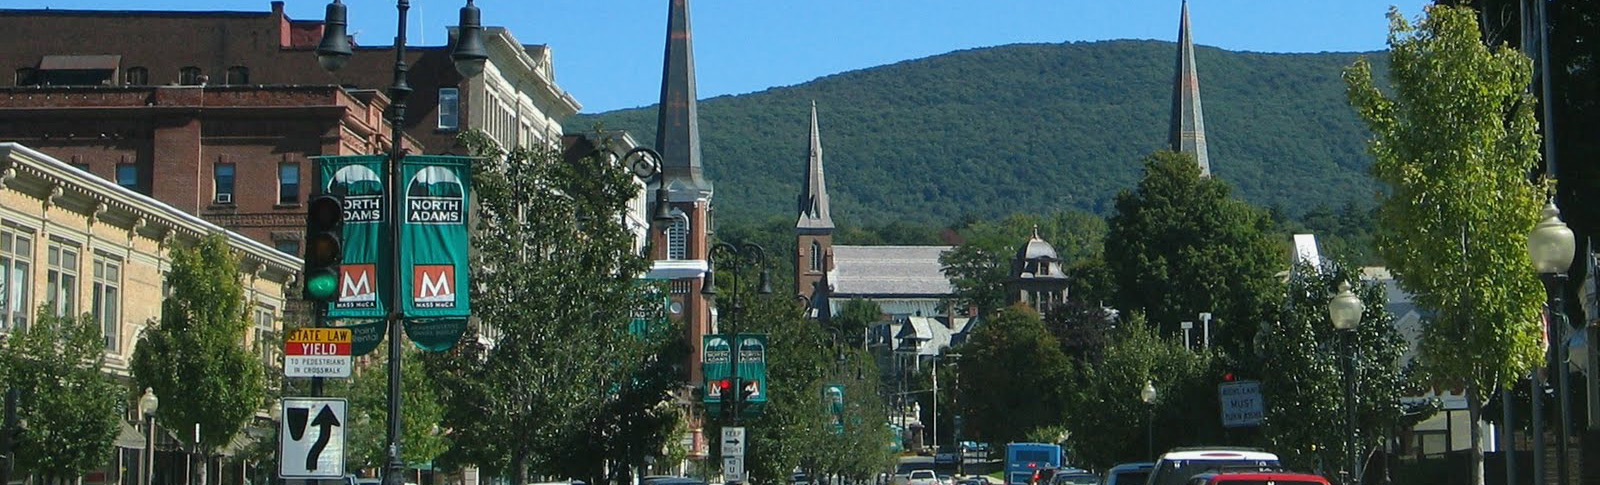 Berkshires and downtown, North Adams